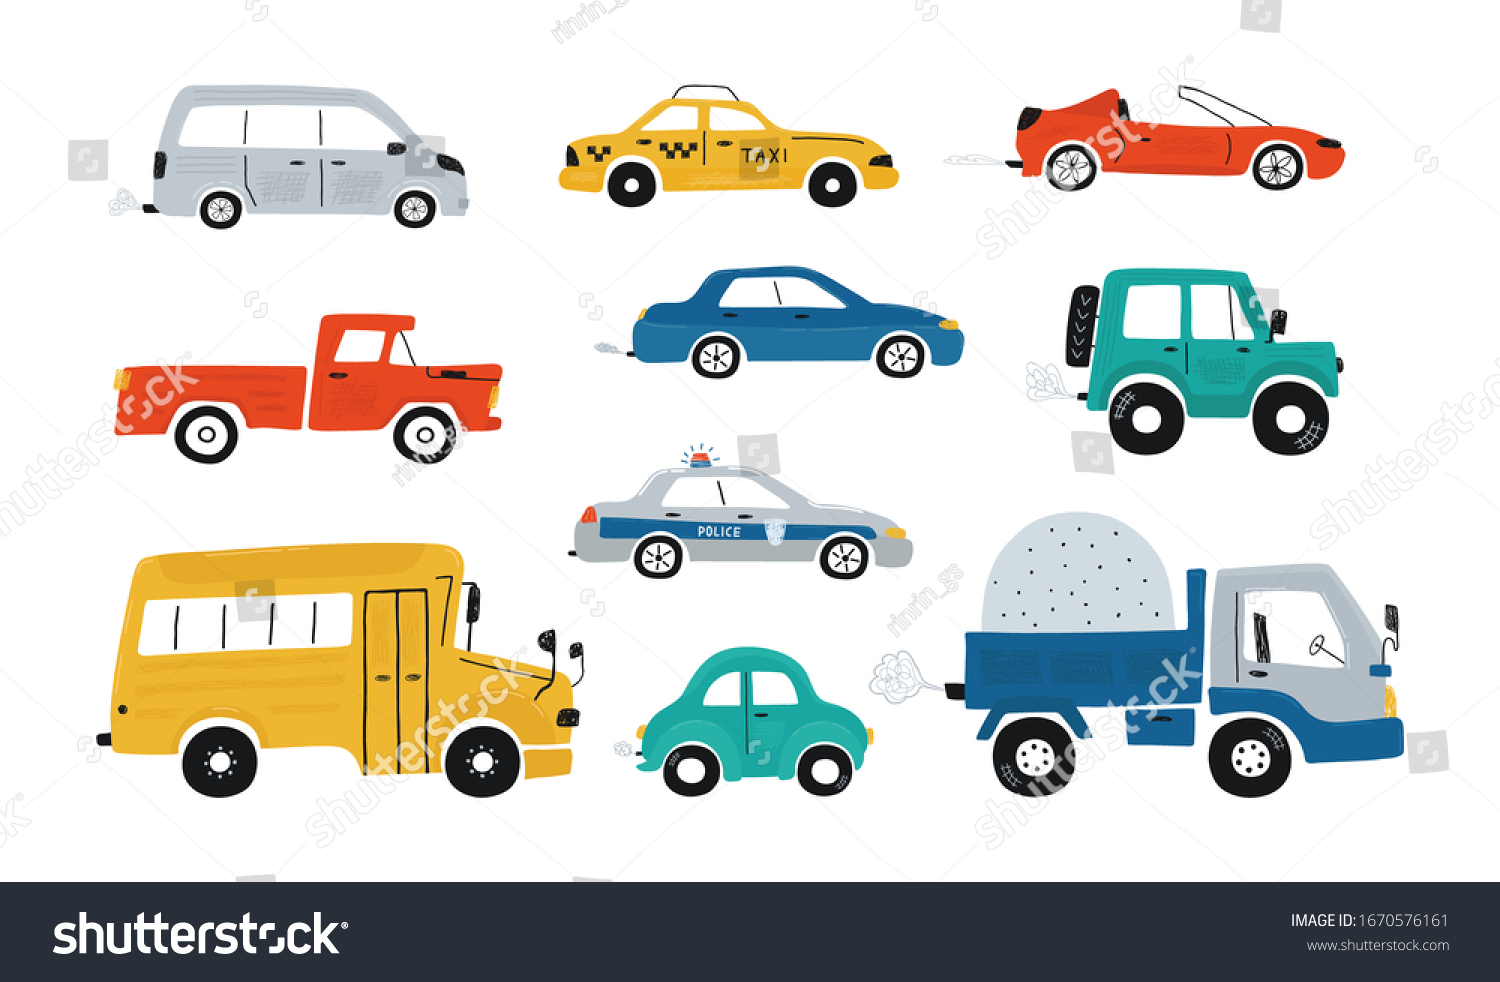 SVG of Cute collection colorful cars isolated on a white background. Icons in hand drawn style for design of children's rooms, clothing, textiles. Vector illustration svg